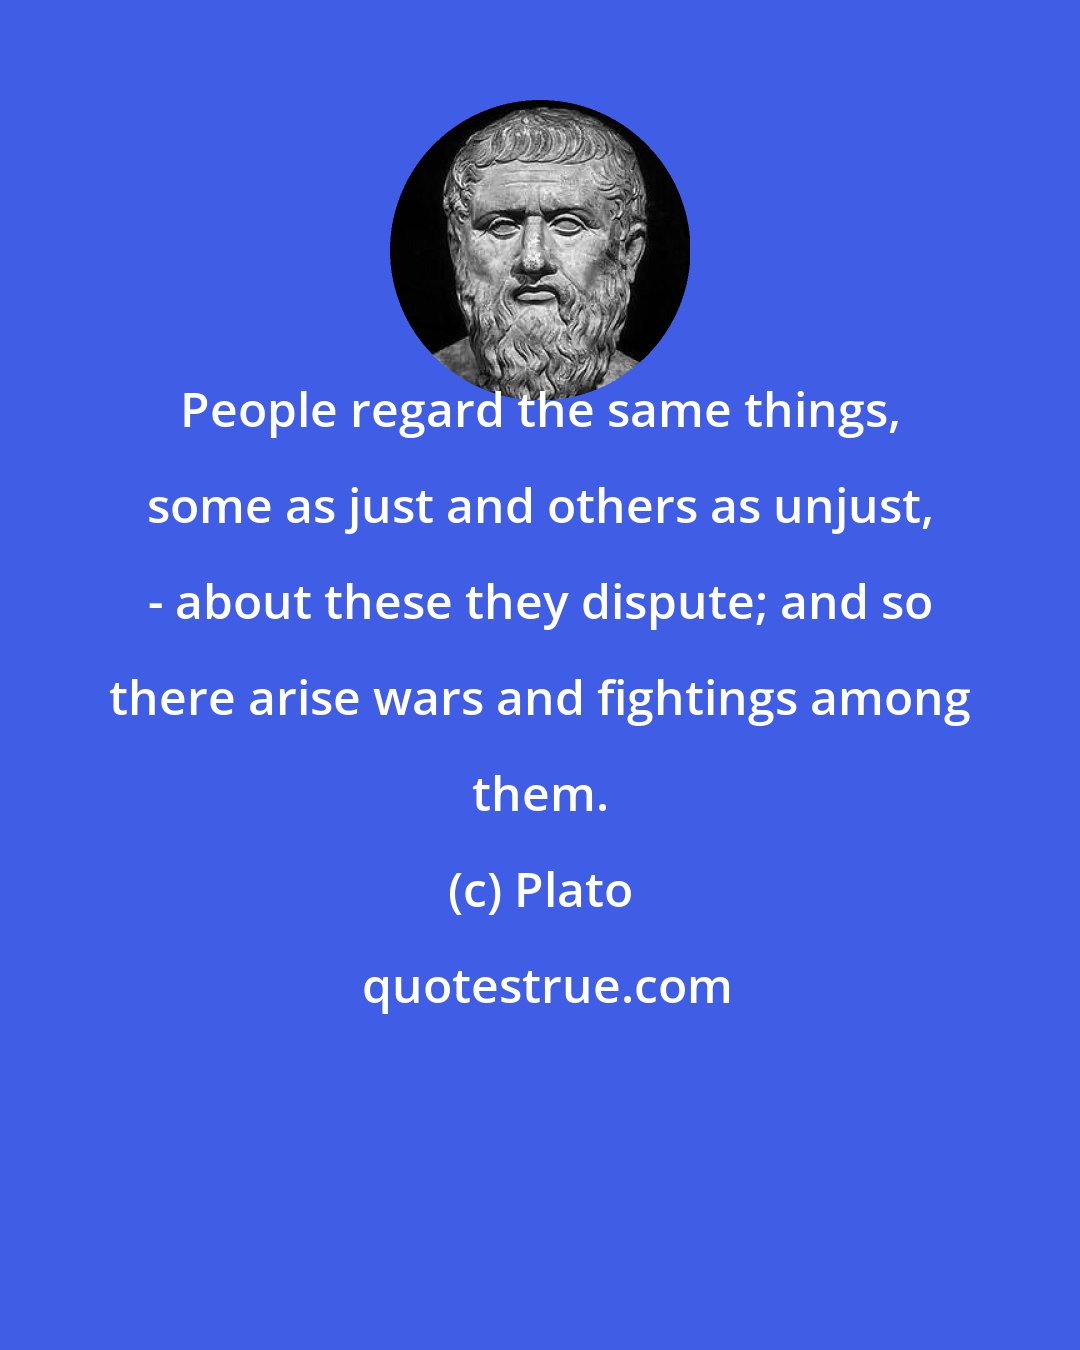 Plato: People regard the same things, some as just and others as unjust, - about these they dispute; and so there arise wars and fightings among them.